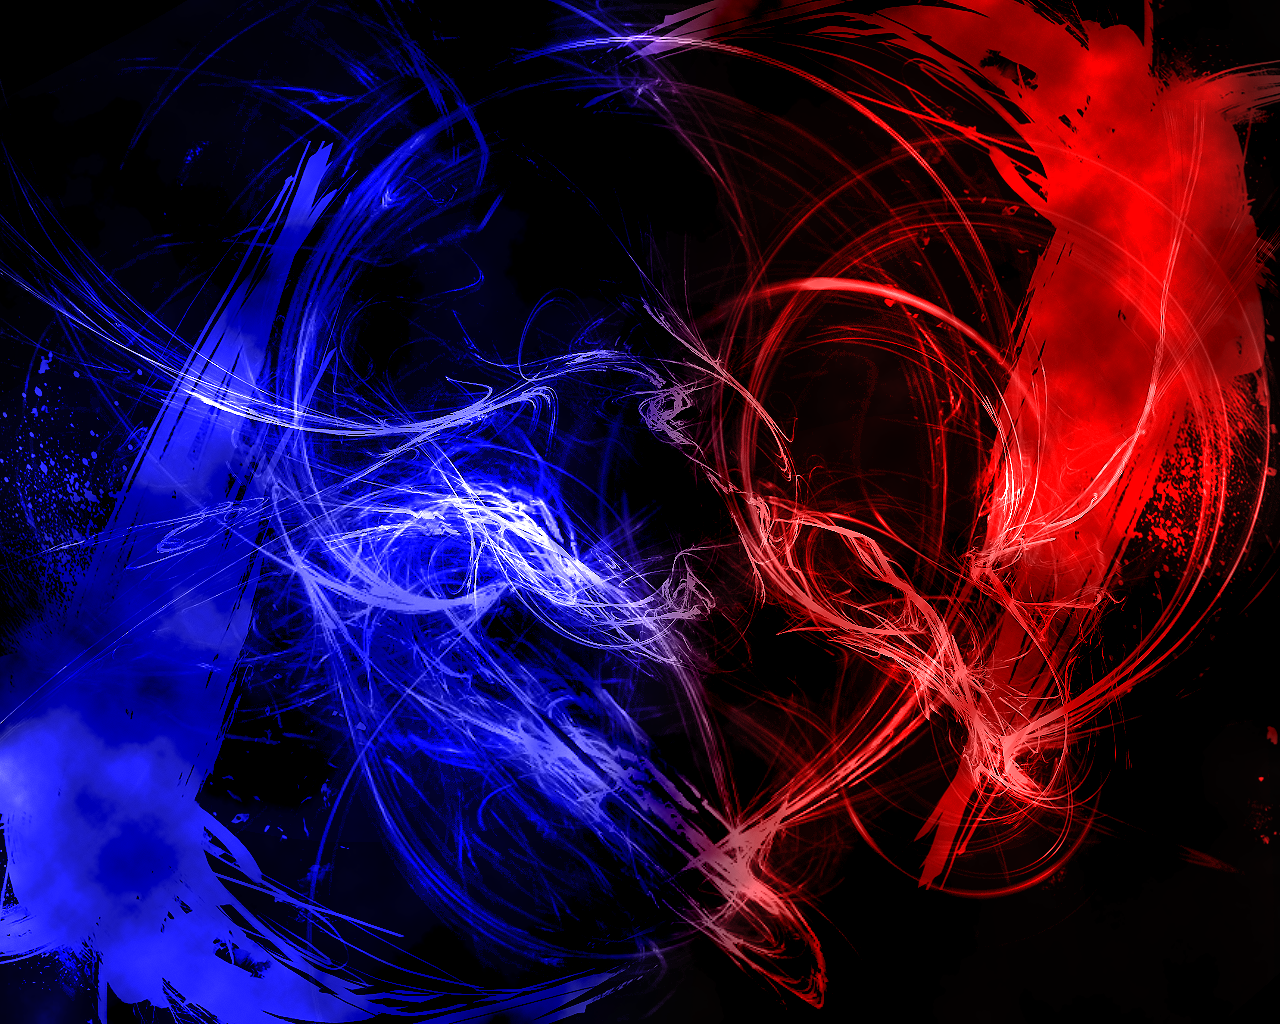 Red Vs Blue Abstract Wallpaper By Br8y16